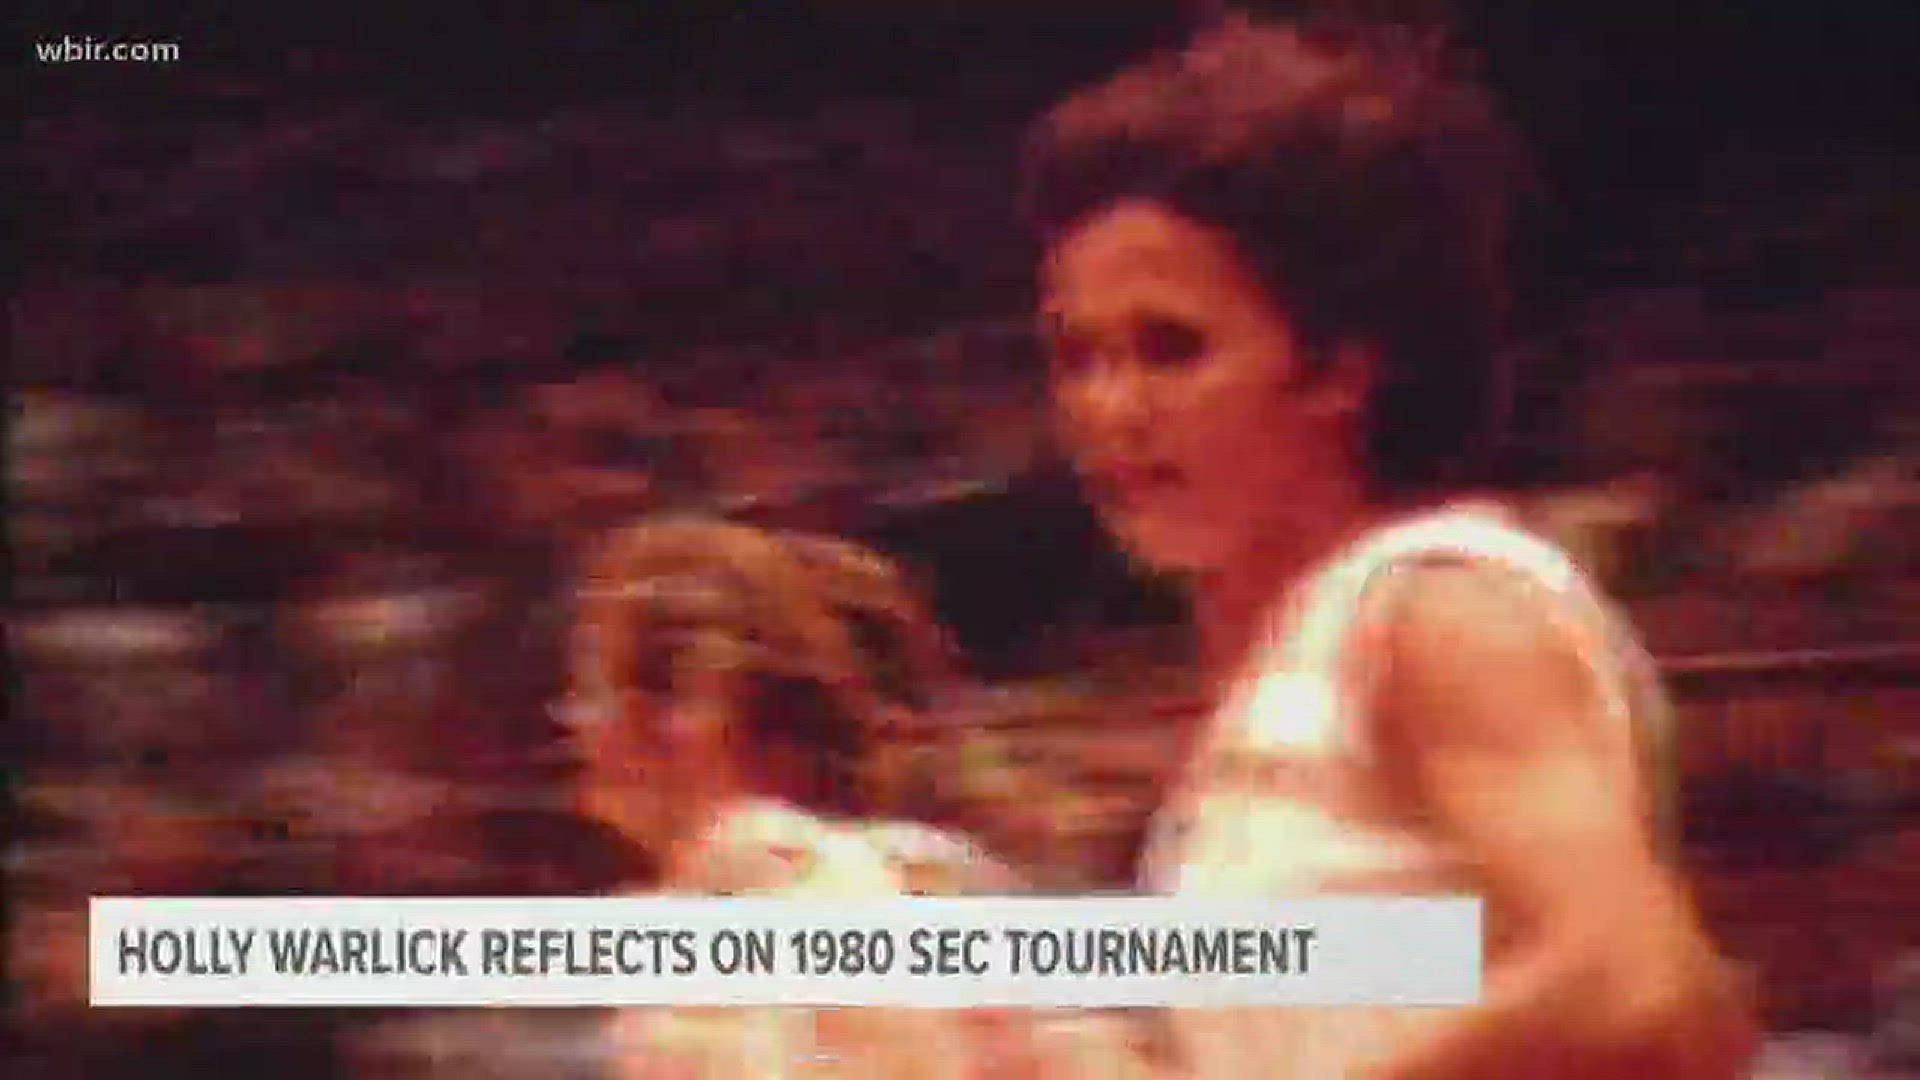 The Lady Vols are set to take part in the SEC Tournament in Nashville. Tennessee won the very first women's SEC tourney in 1980 and current head coach Holly Warlick was the point guard on that team.